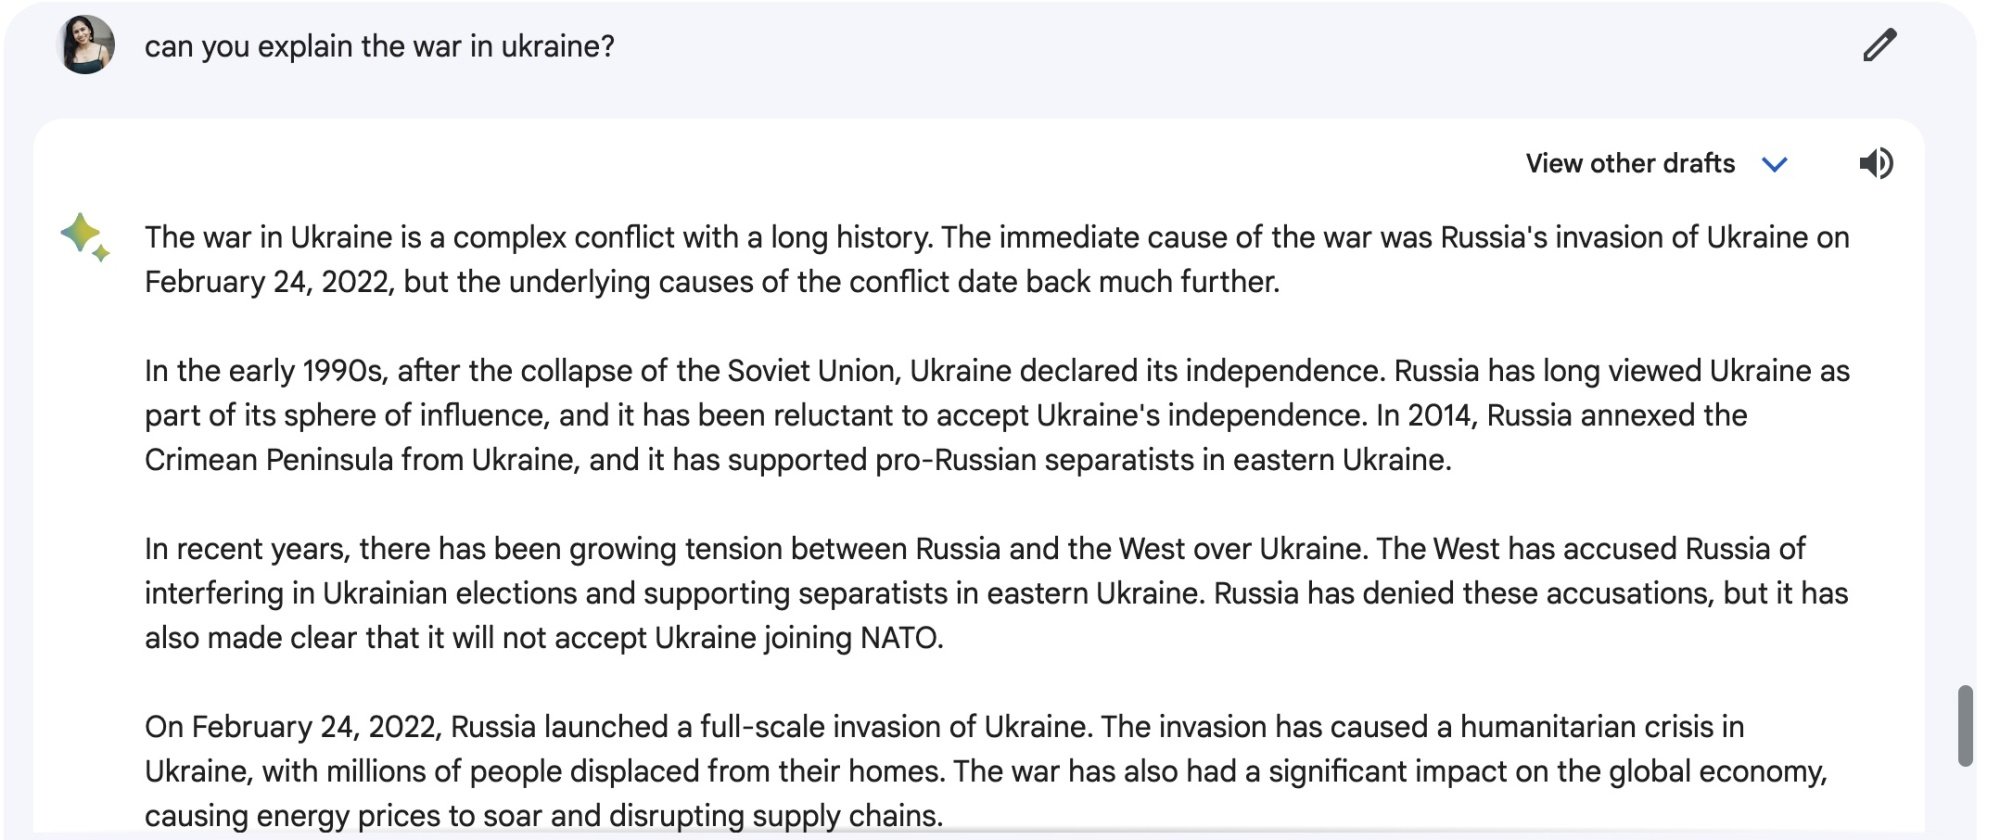 A screenshot of Google Bard answering a question about Ukraine and Russia.